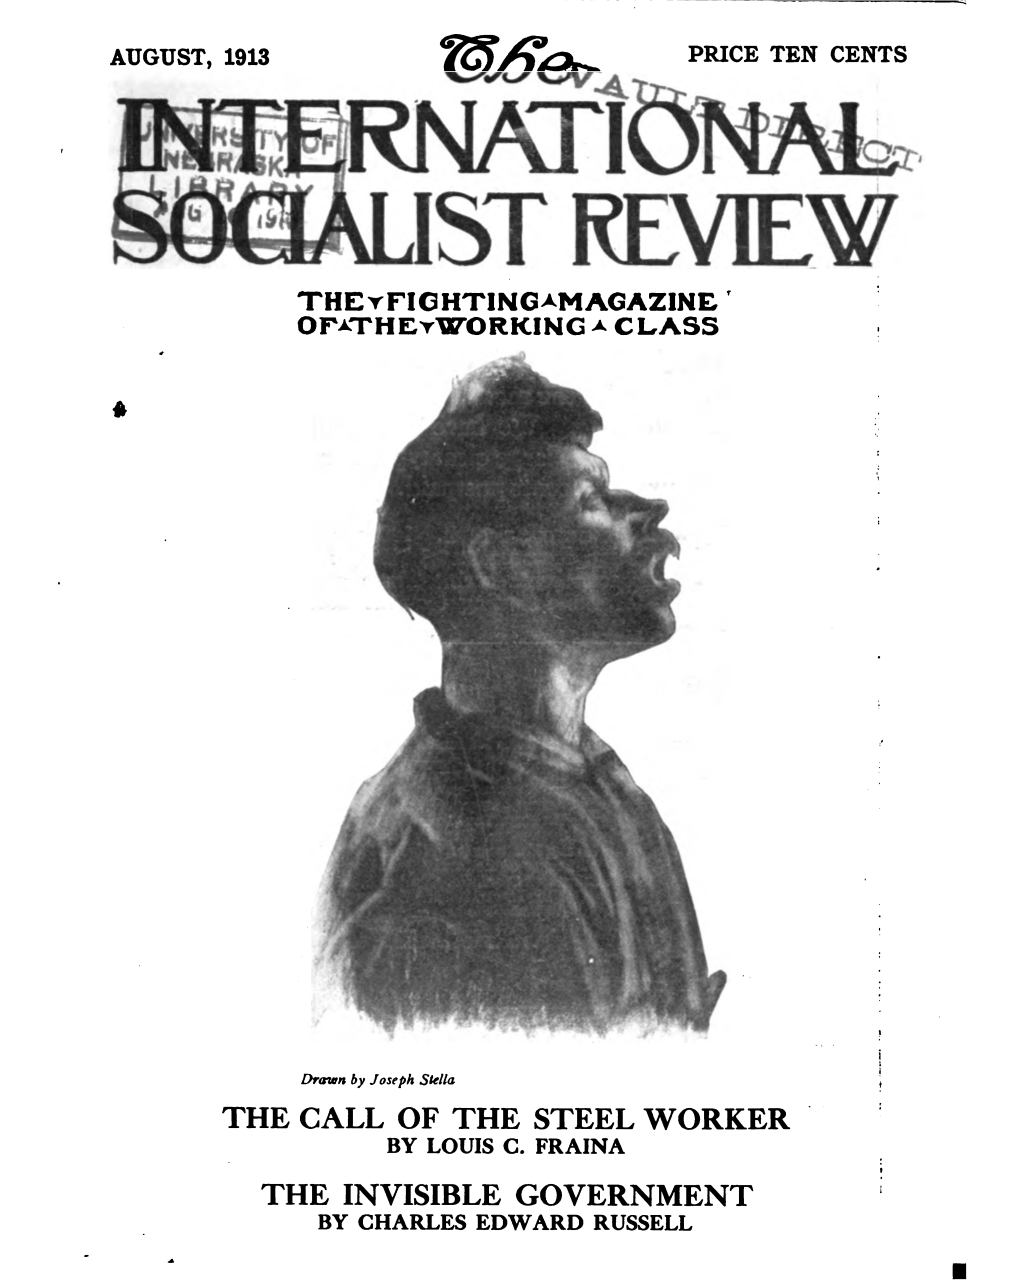 The International Socialist Review One Year